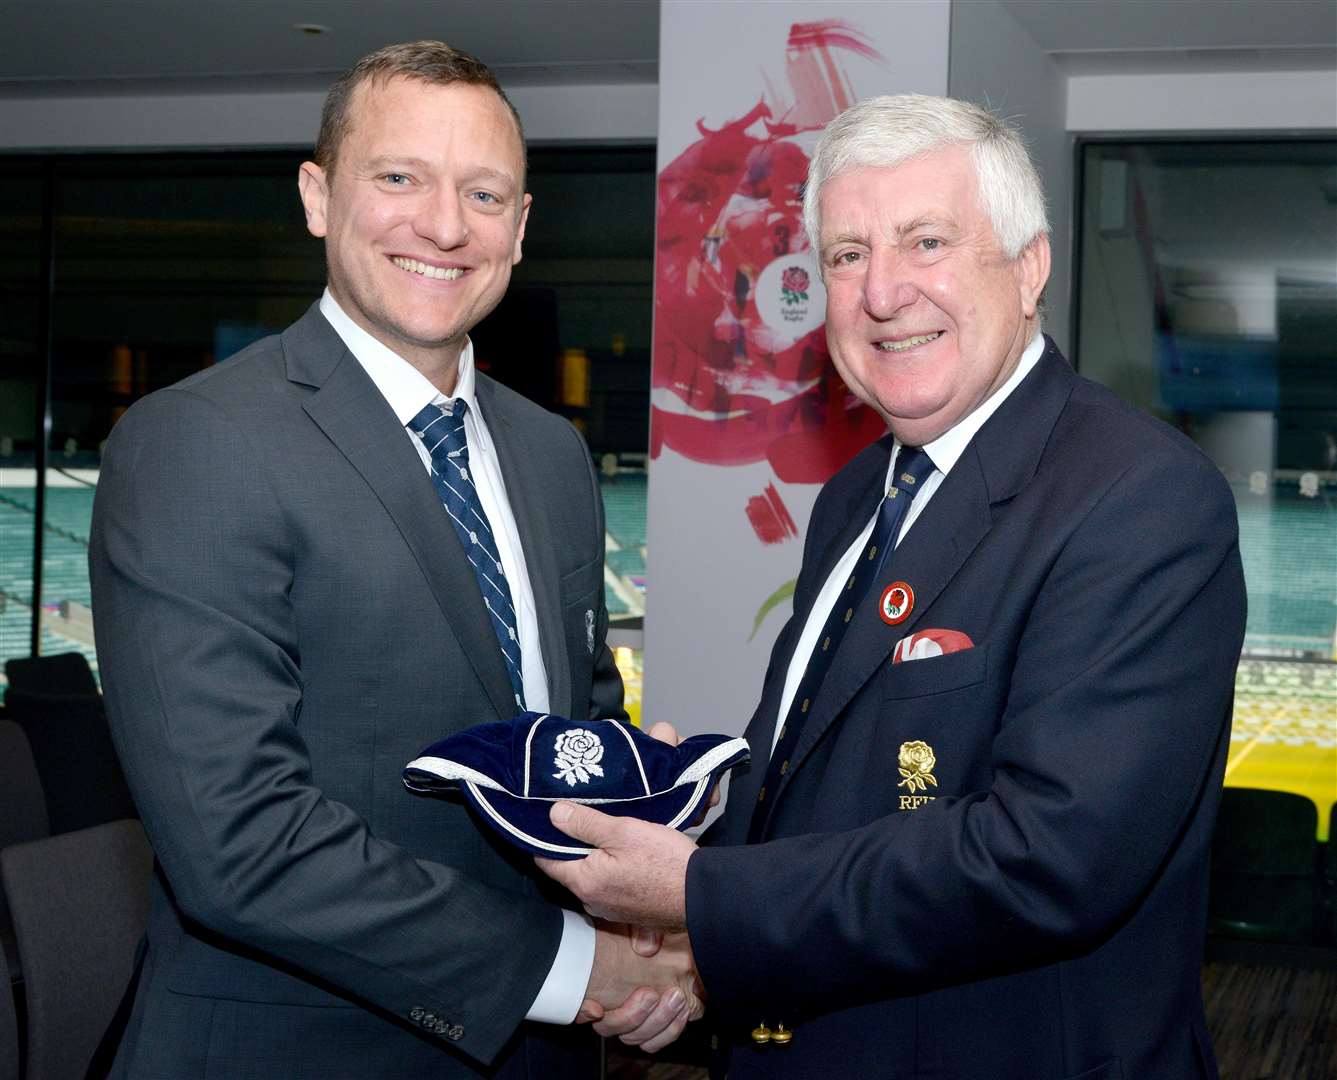 Matthew Carley with the then-president of the RFU, His Honour Jeff Blackett. Picture: RFU Collections